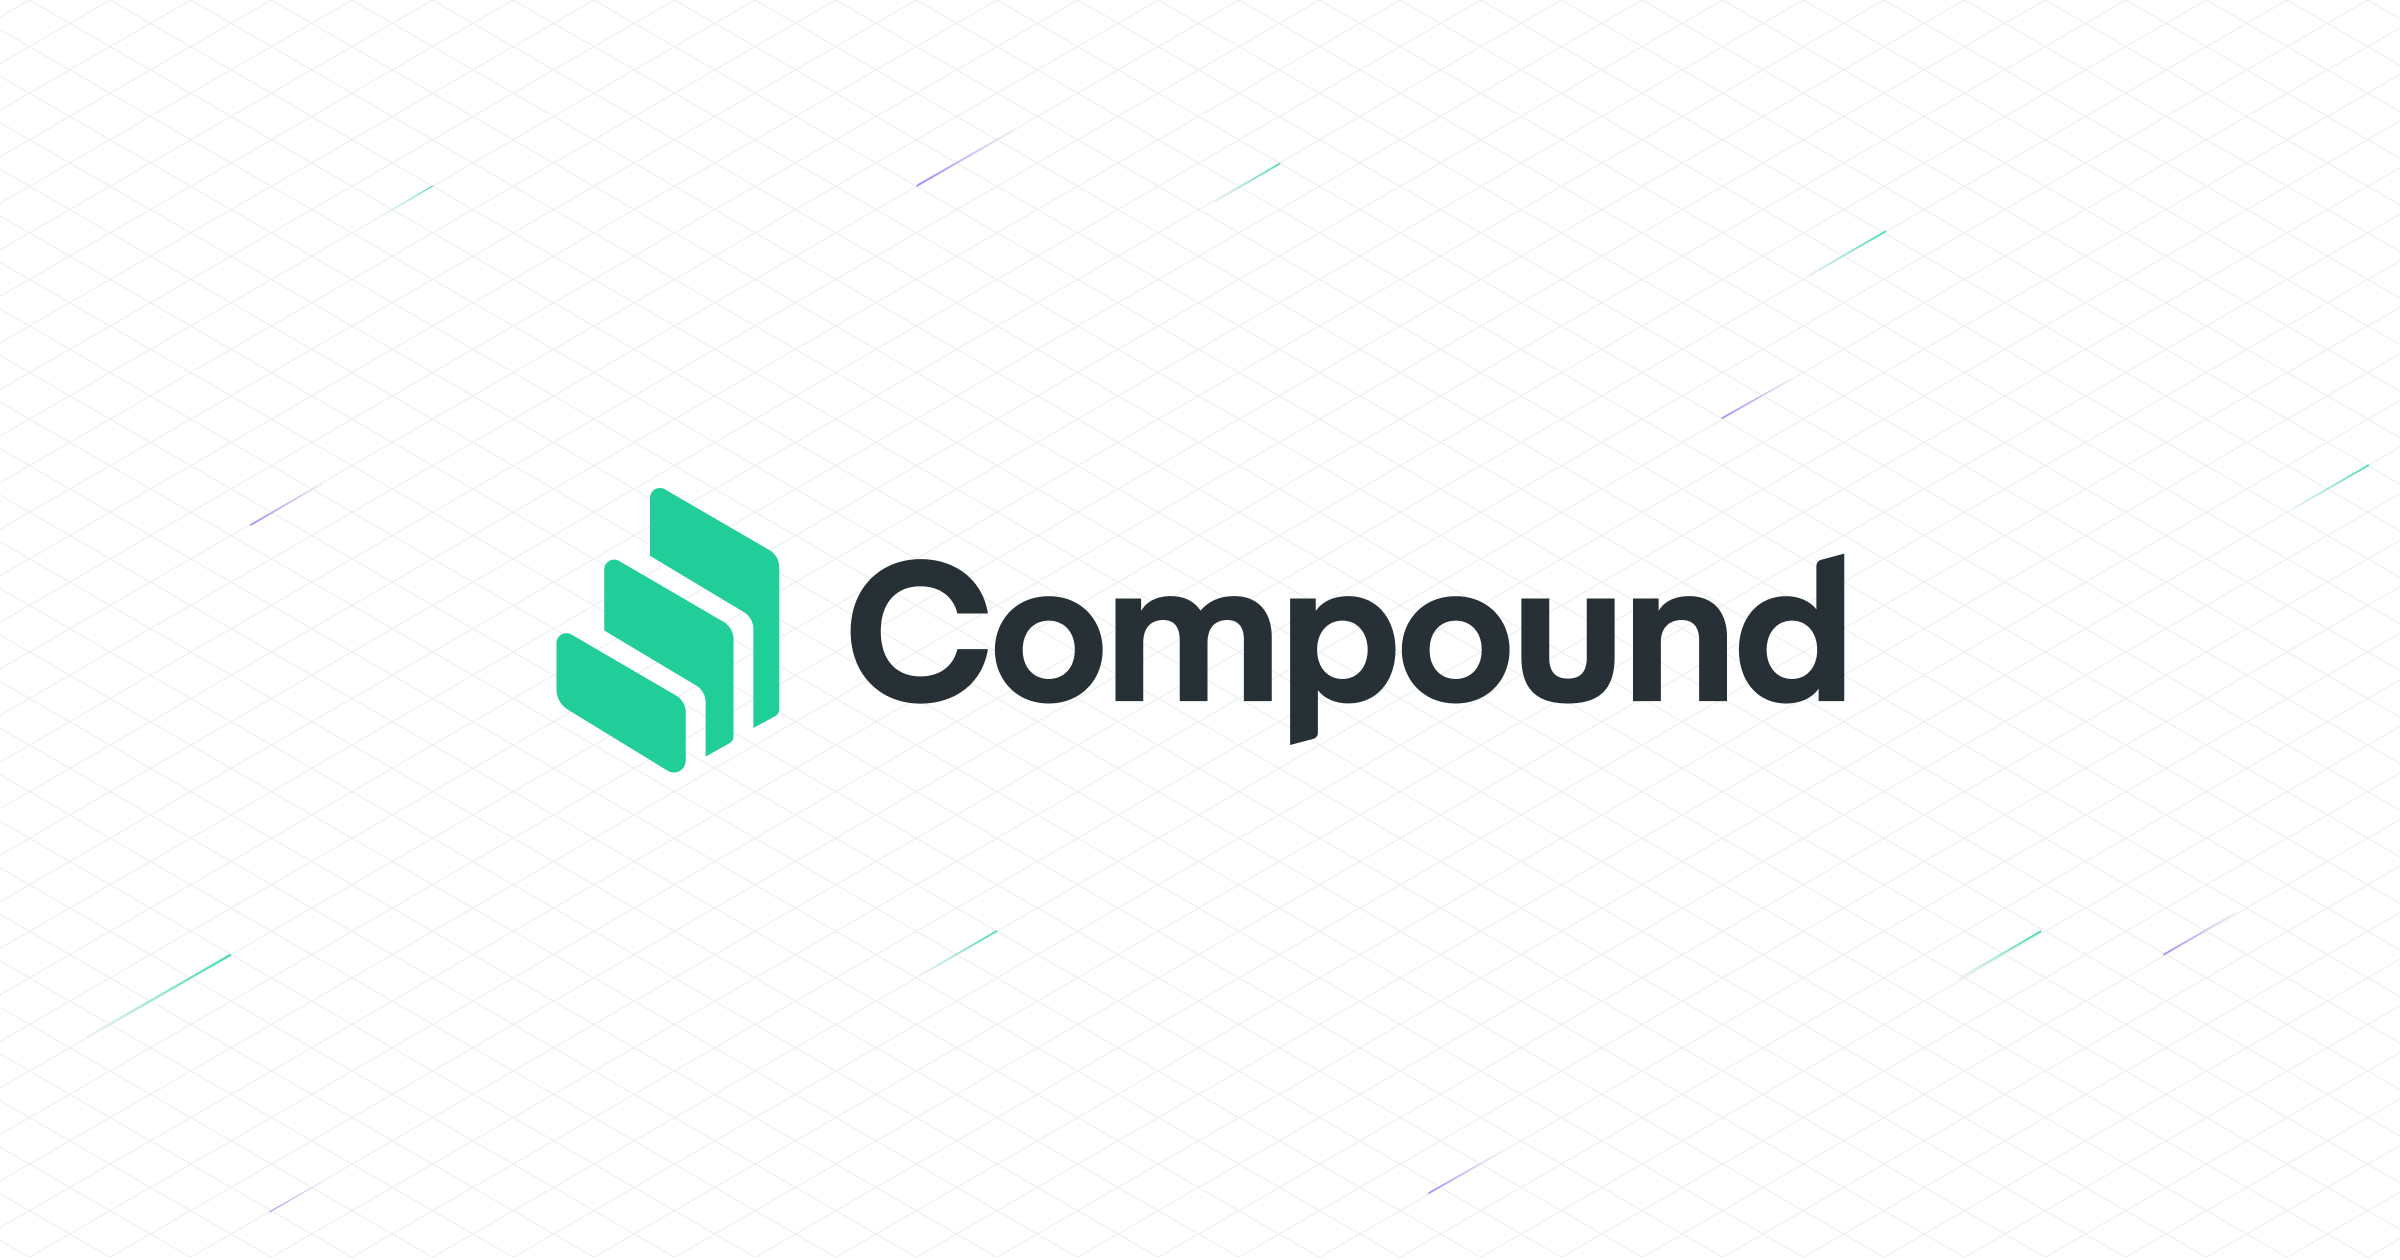 Compound logo and black text on a white background